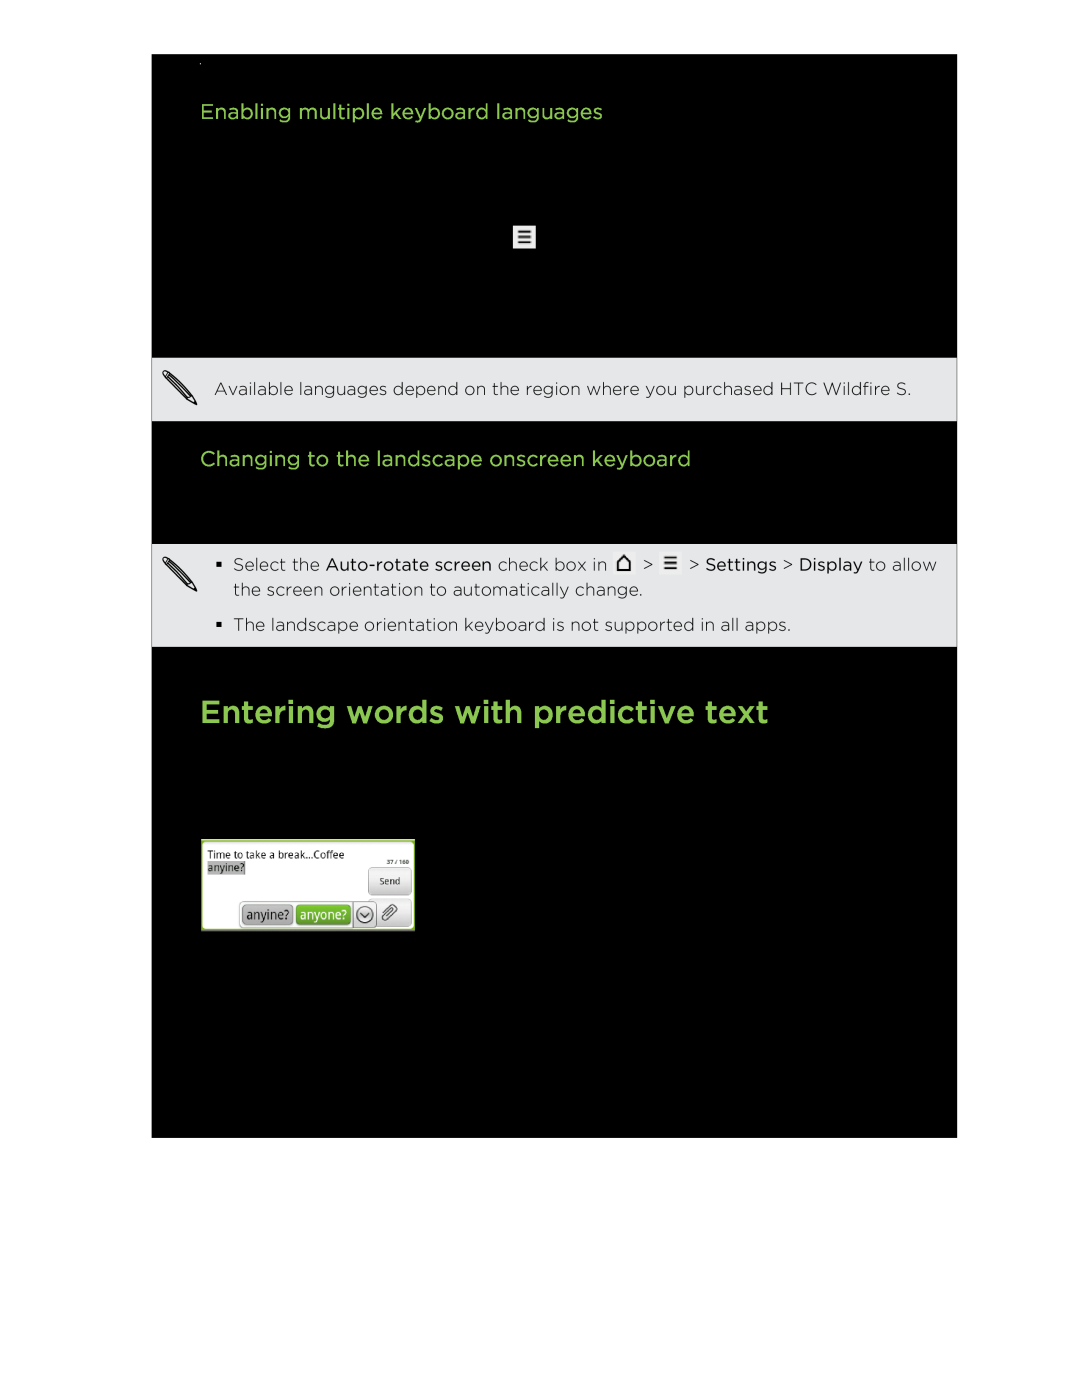 HTC S manual Entering words with predictive text, Enabling multiple keyboard languages 